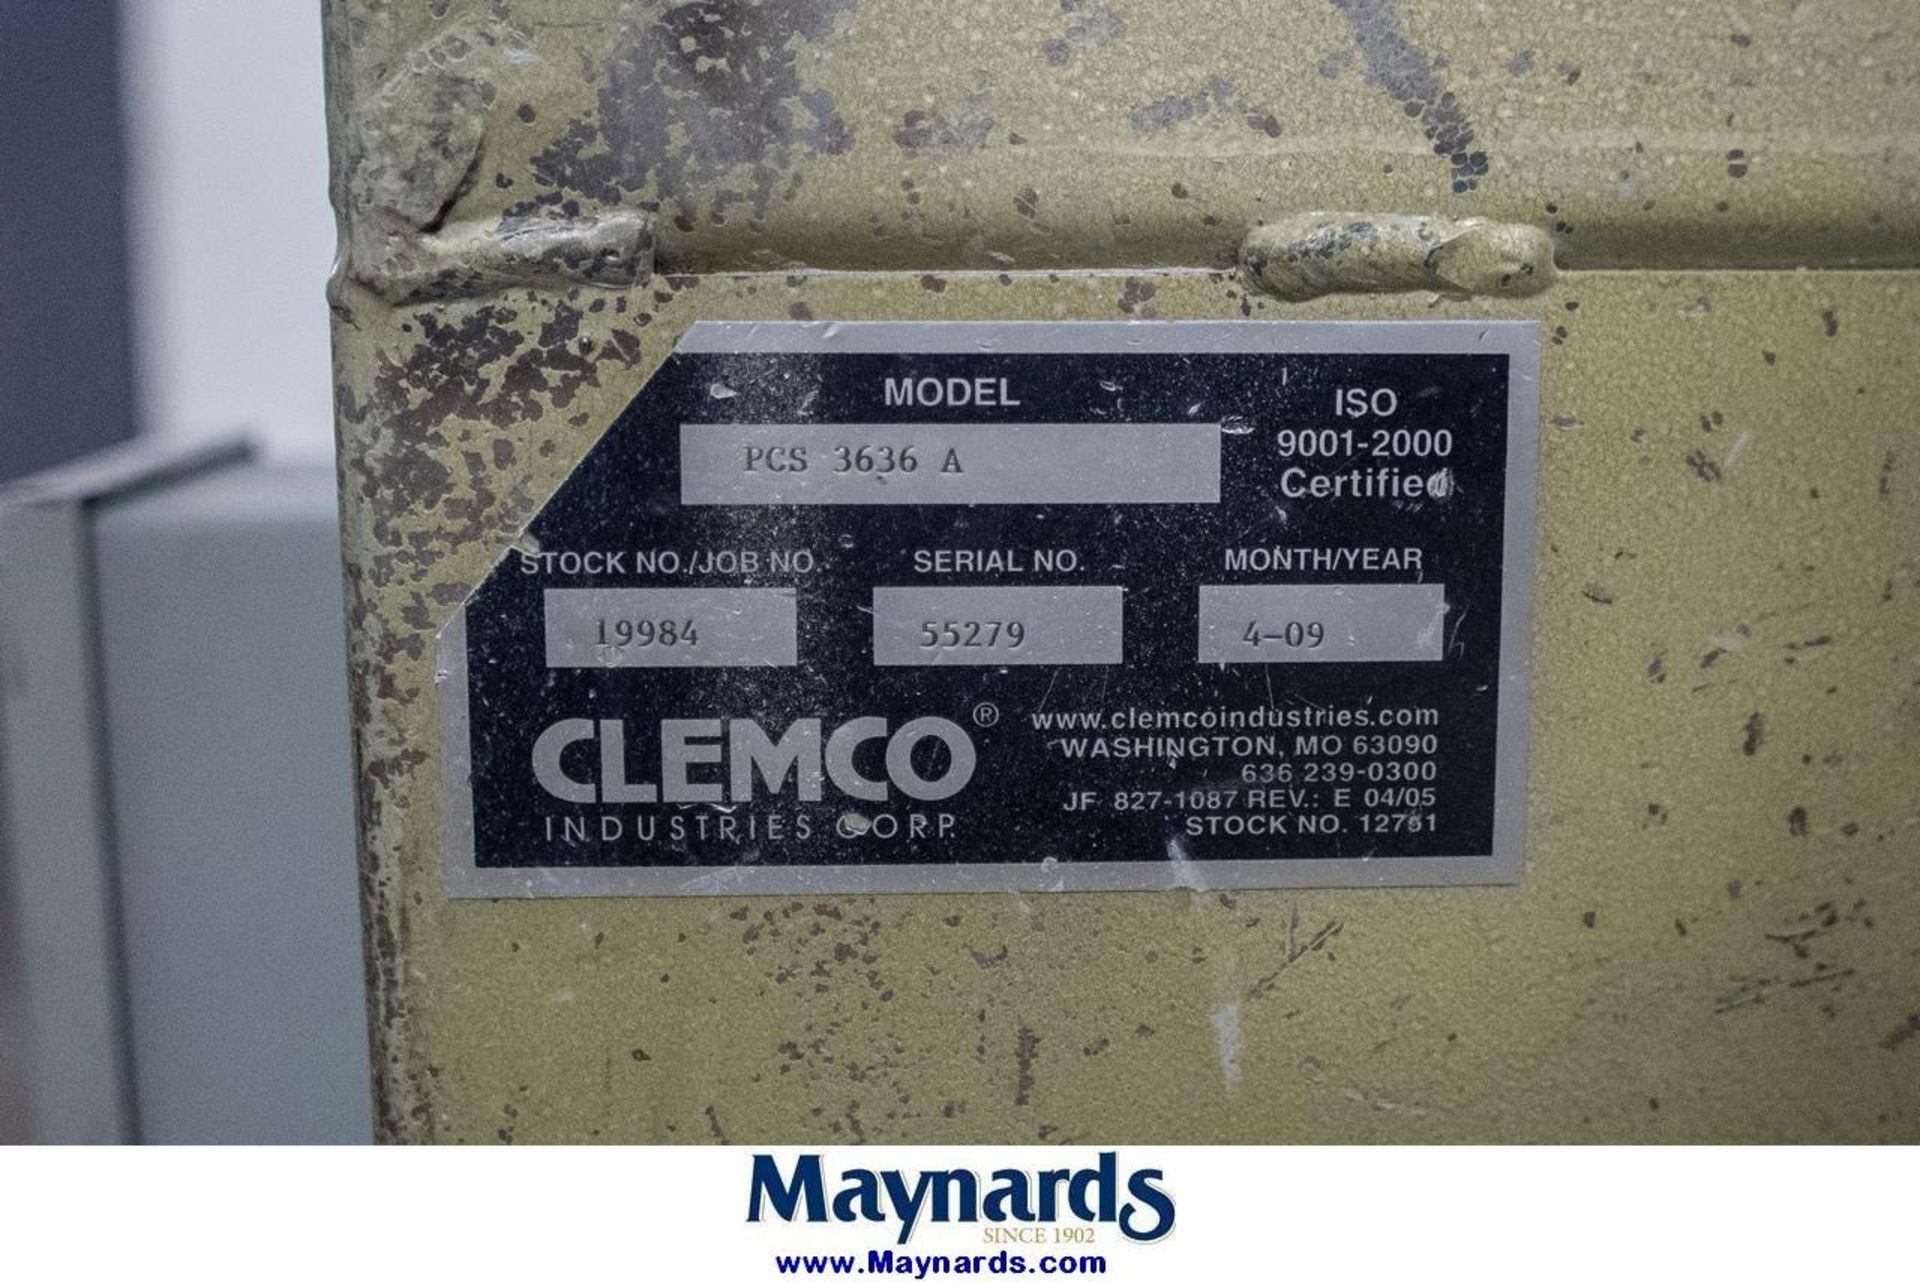 2009 Clemco PCS 3636 A Blast Cabinet w/ Blast/Reclaim System & Dust Collector - Image 5 of 13